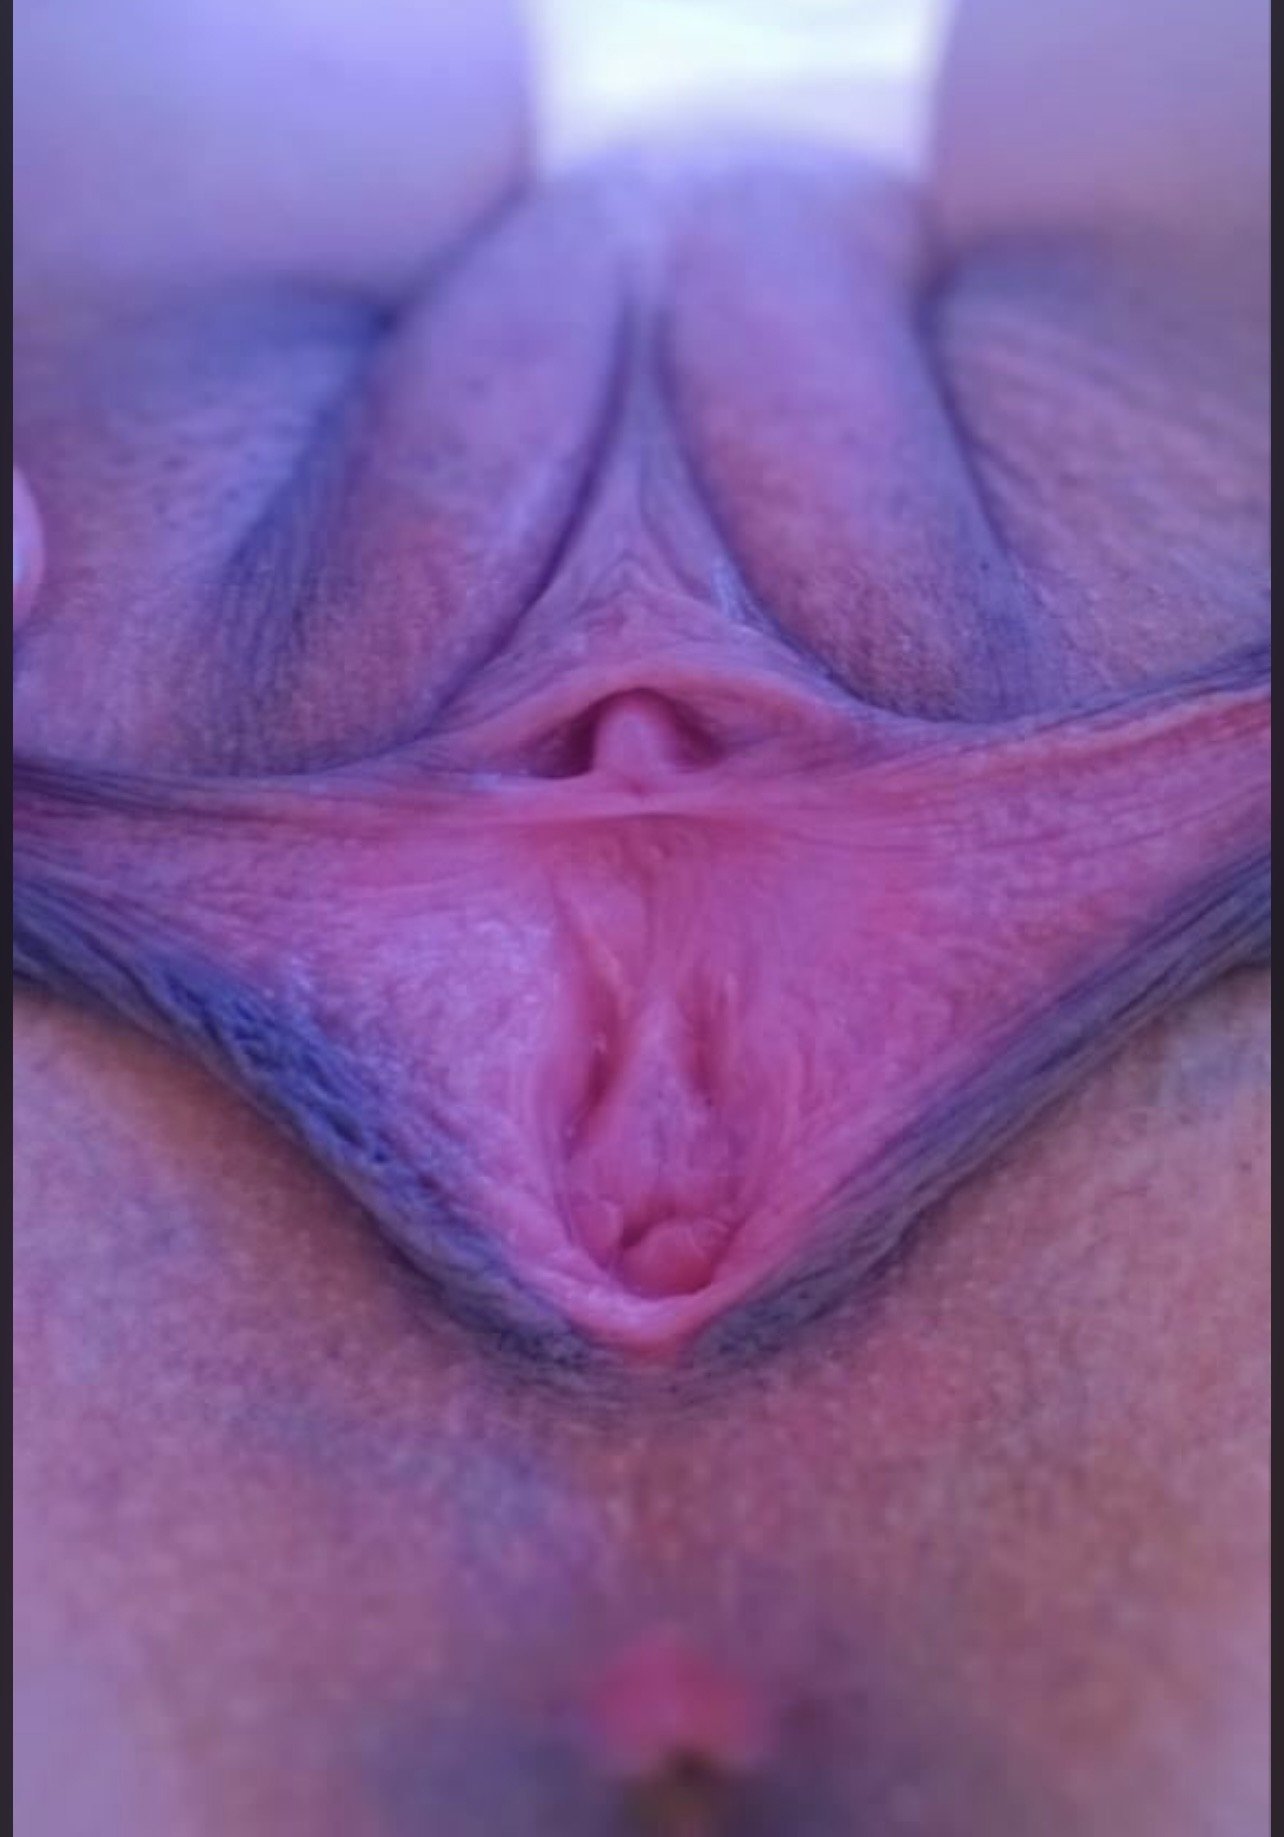 Watch the Photo by Pussypussyandpussy with the username @Pussypussyandpussy, posted on December 21, 2021. The post is about the topic Meaty Pussy Lips, Creampies and Milfs.